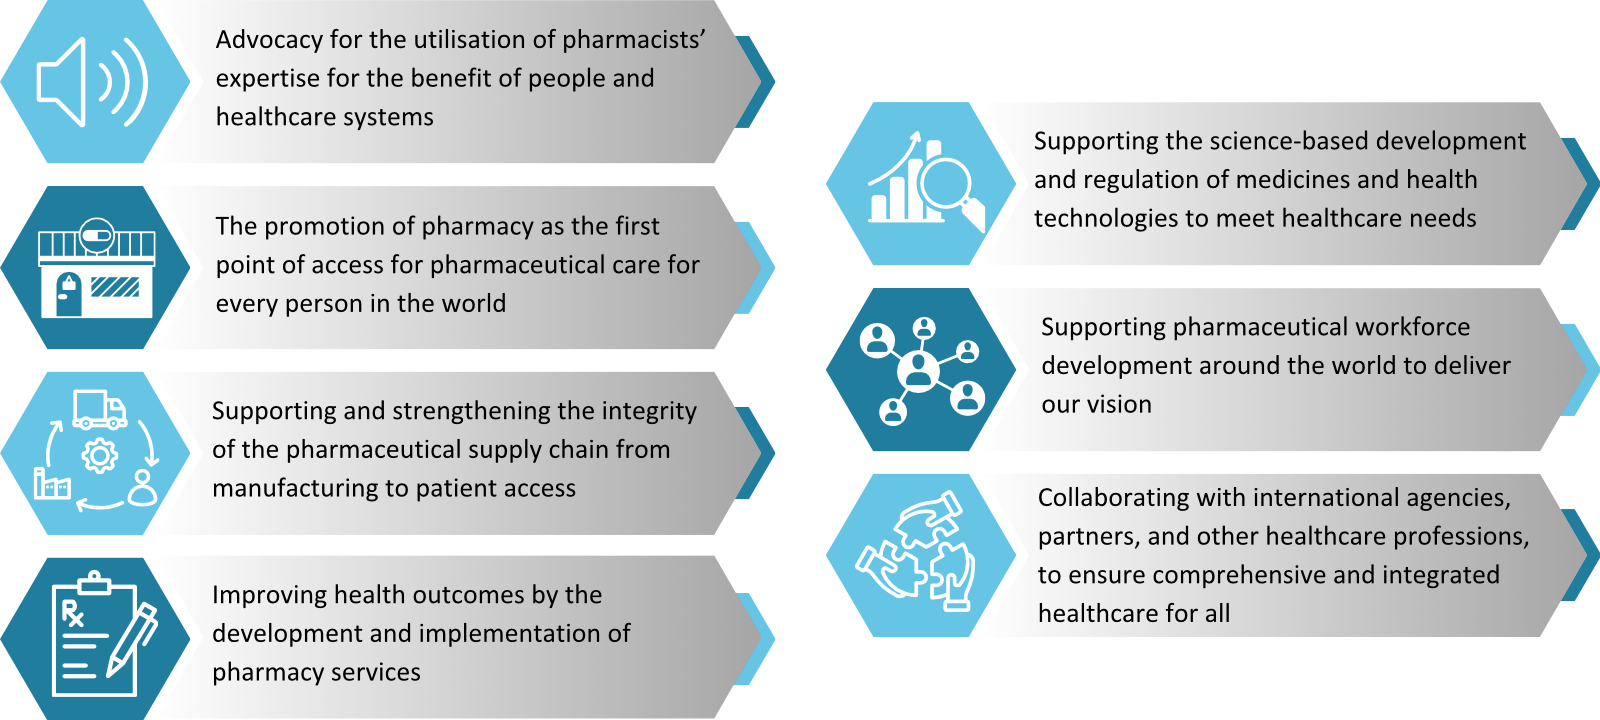 Advocacy for the utilisation of pharmacists’ expertise for the benefit of people and healthcare systems;
The promotion of pharmacy as the first point of access for pharmaceutical care for every person in the world;
Supporting and strengthening the integrity of the pharmaceutical supply chain from manufacturing to patient access;
Improving health outcomes by the development and implementation of pharmacy services;
Supporting the science-based development and regulation of medicines and health technologies to meet healthcare needs;
Supporting pharmaceutical workforce development around the world to deliver our vision;
Collaborating with international agencies, partners, and other healthcare professions, to ensure comprehensive and integrated healthcare for all.